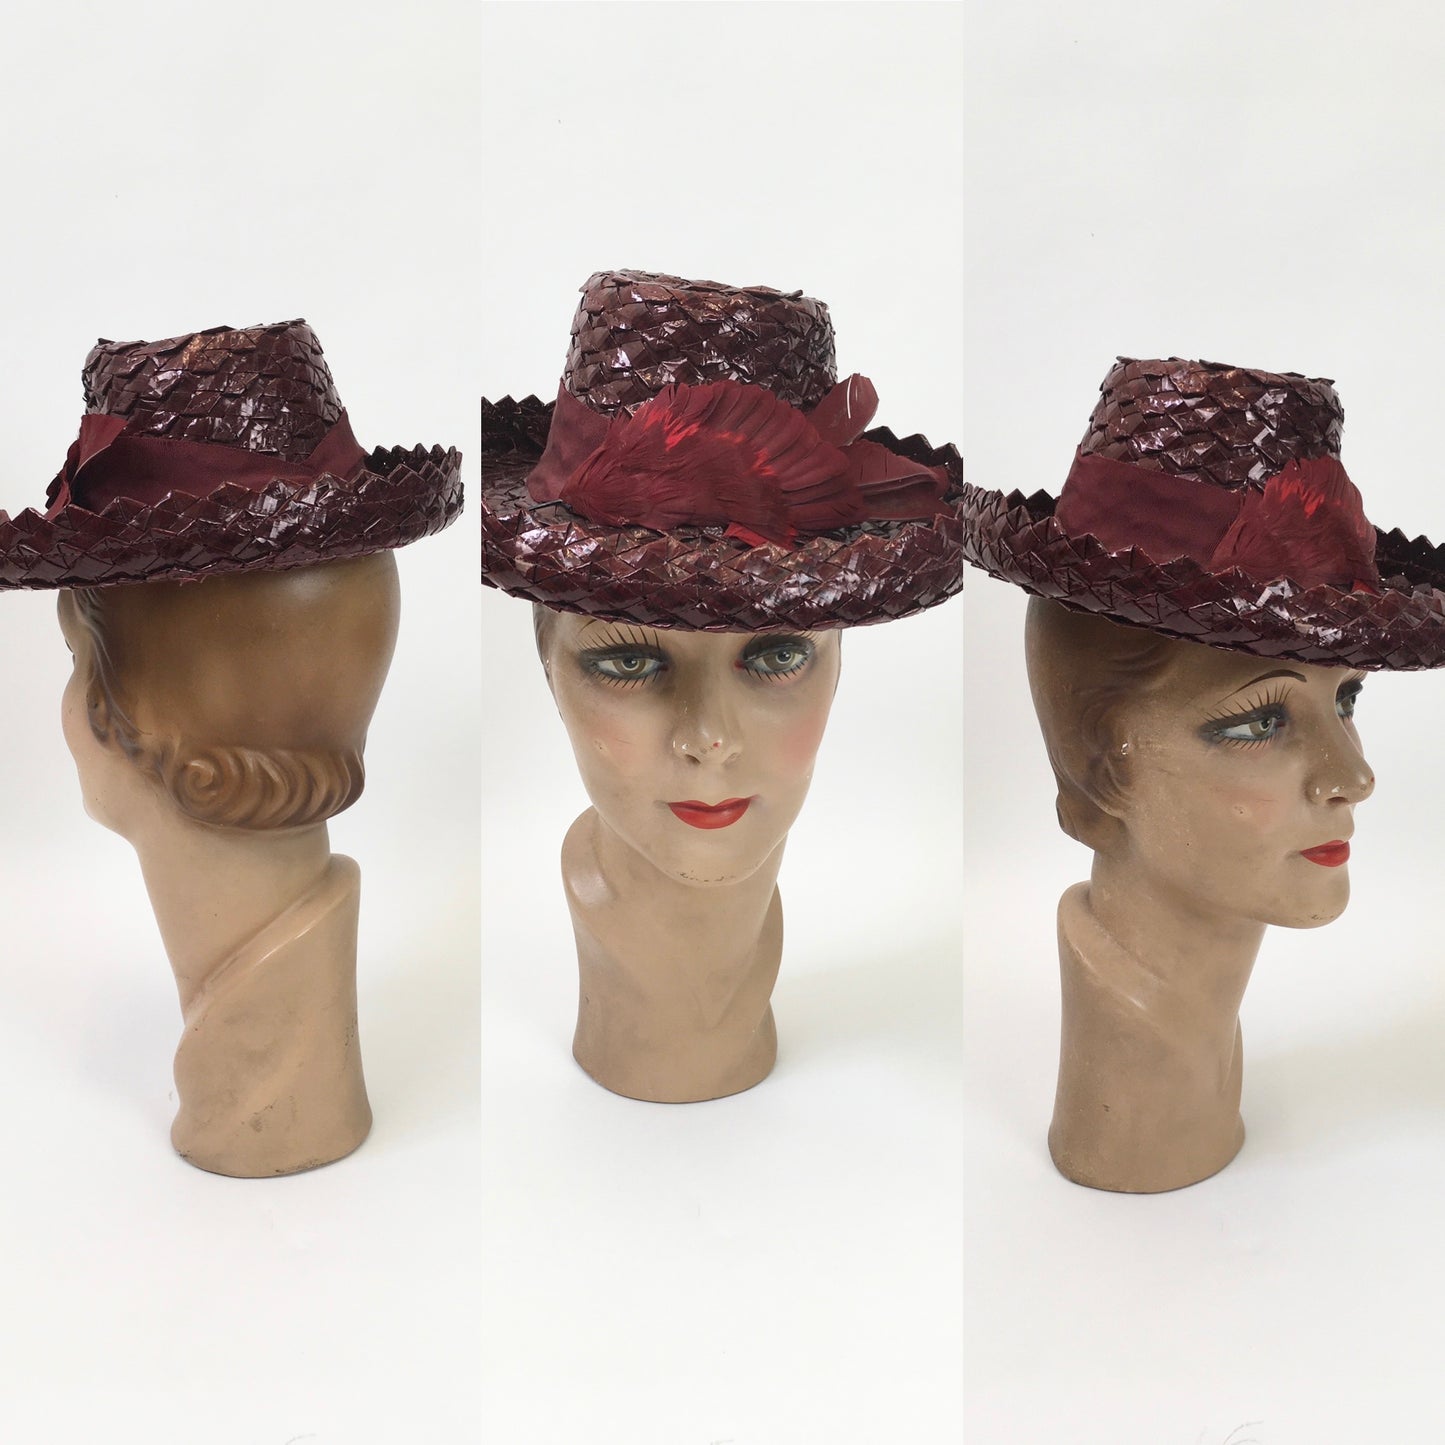 Original 1940's Sensational Raffia Hat with Feather Adornment - In A Warm Red Wine